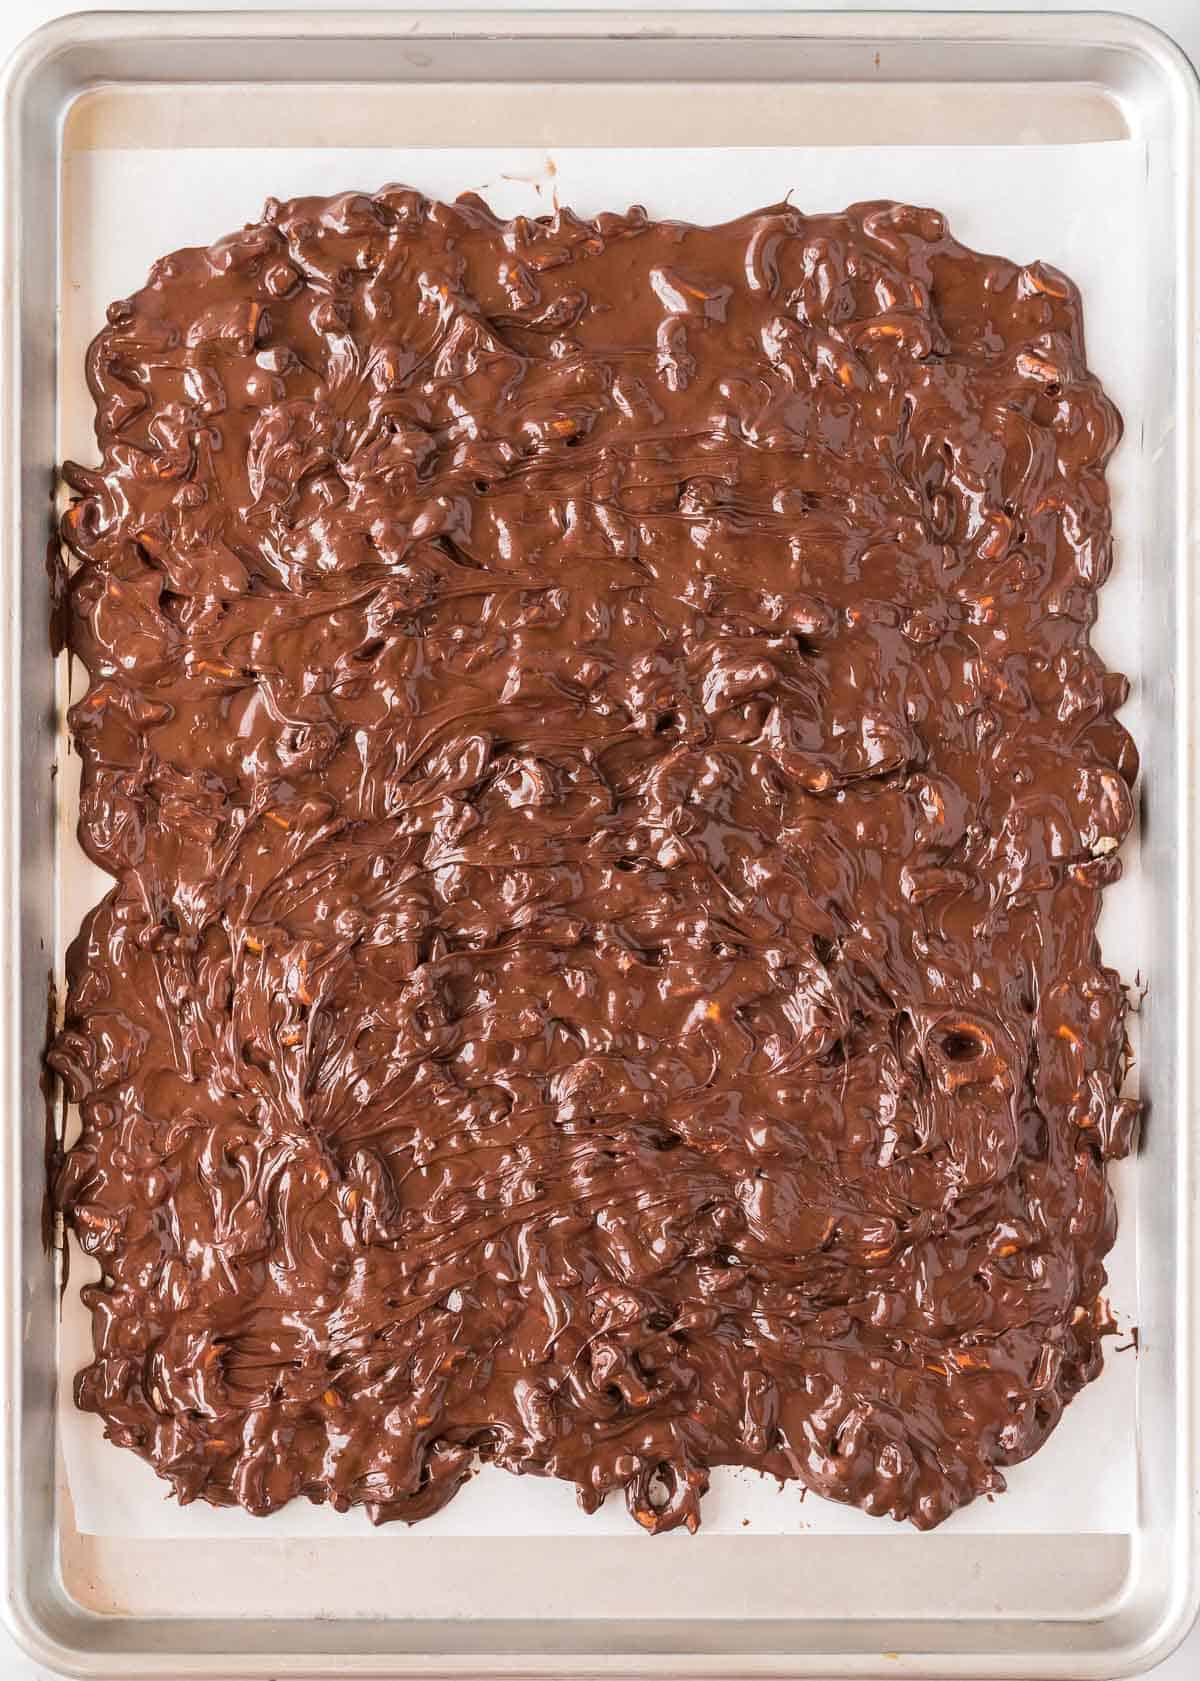 melted chocolate and pretzels spread out on a baking sheet